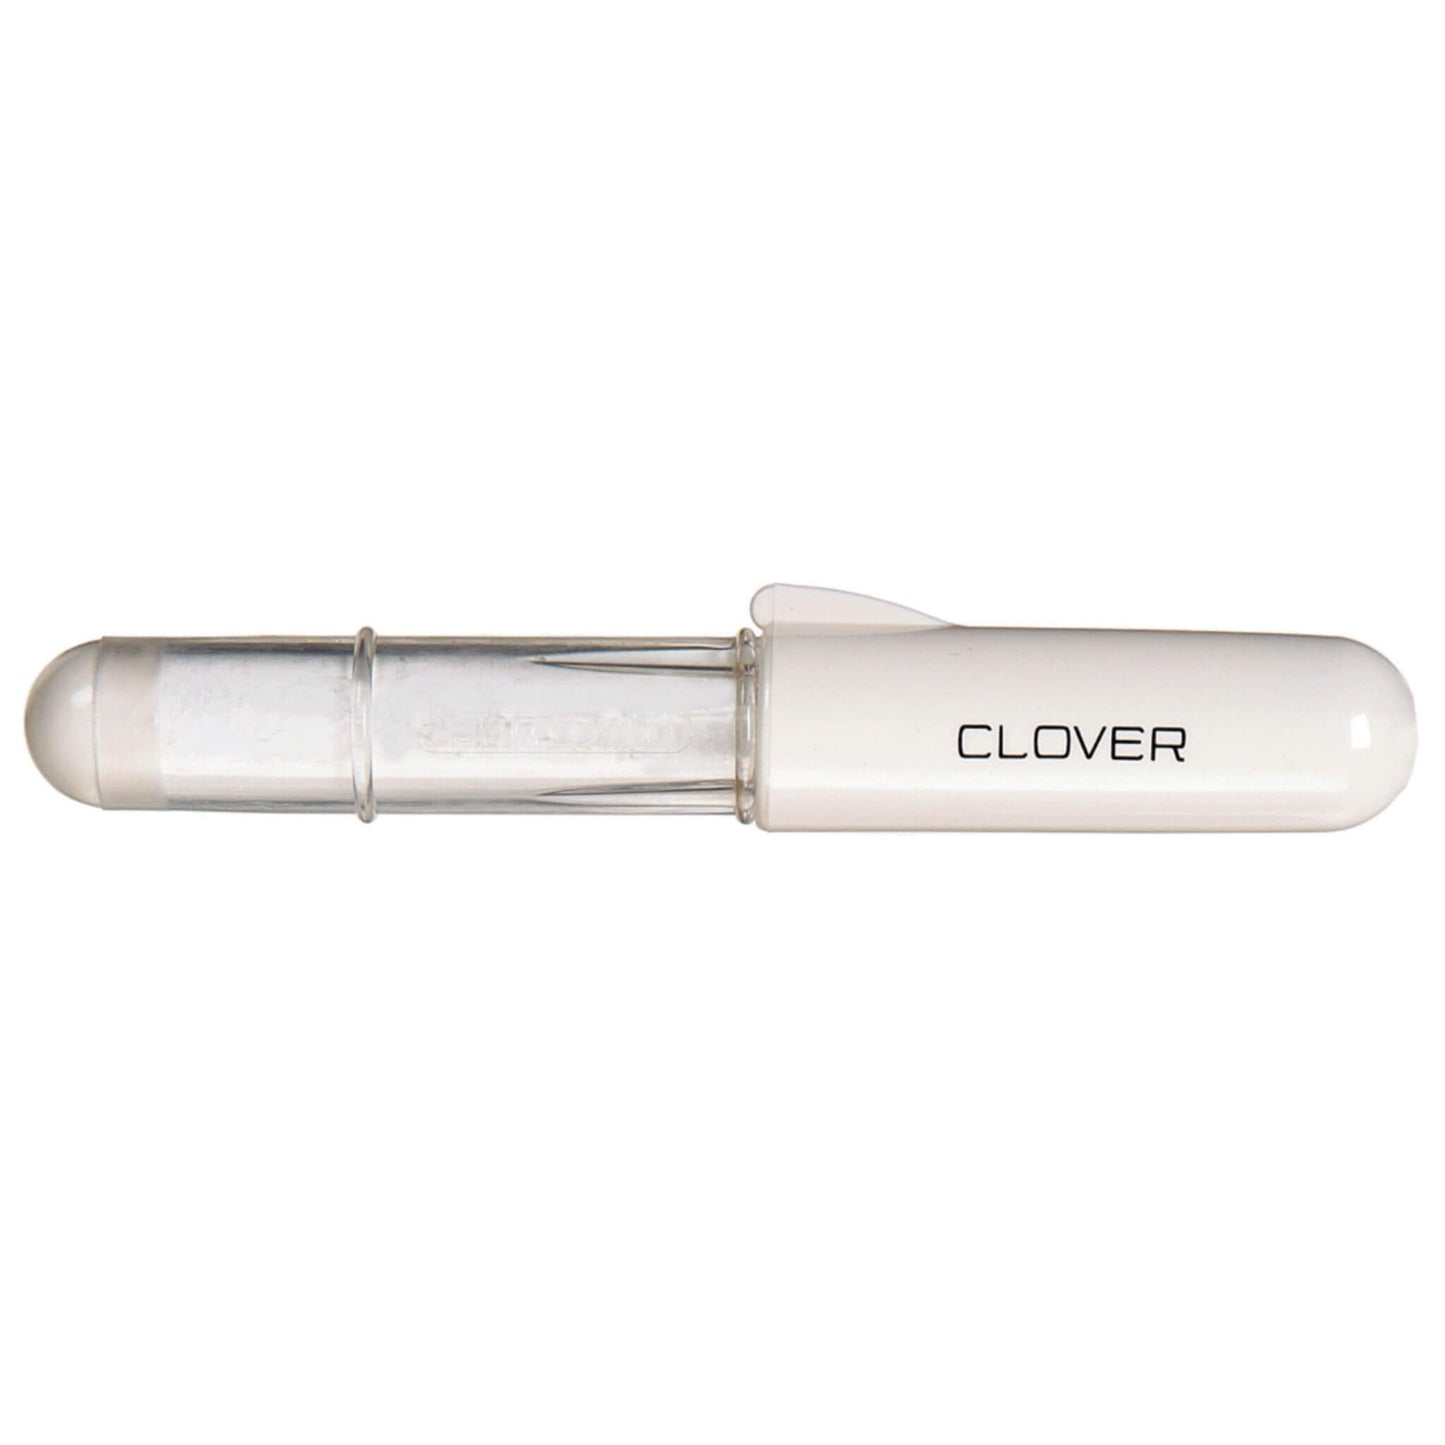 Chaco Liner Style Pen - Clover - White